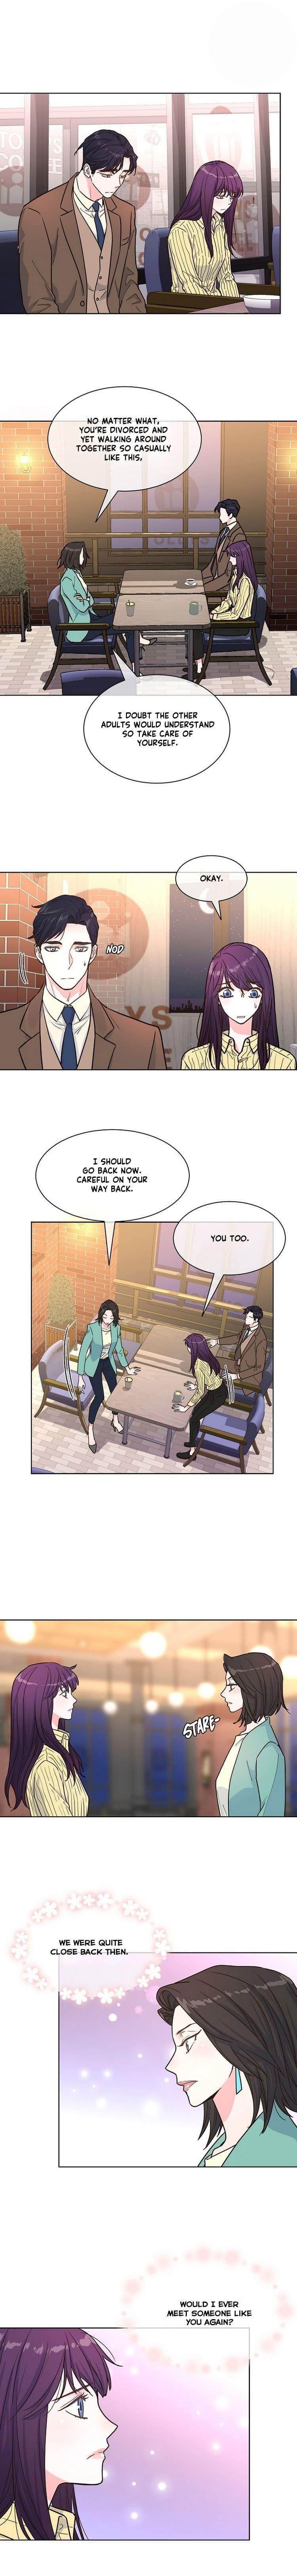 Relationship Once Done Chapter 31 page 4